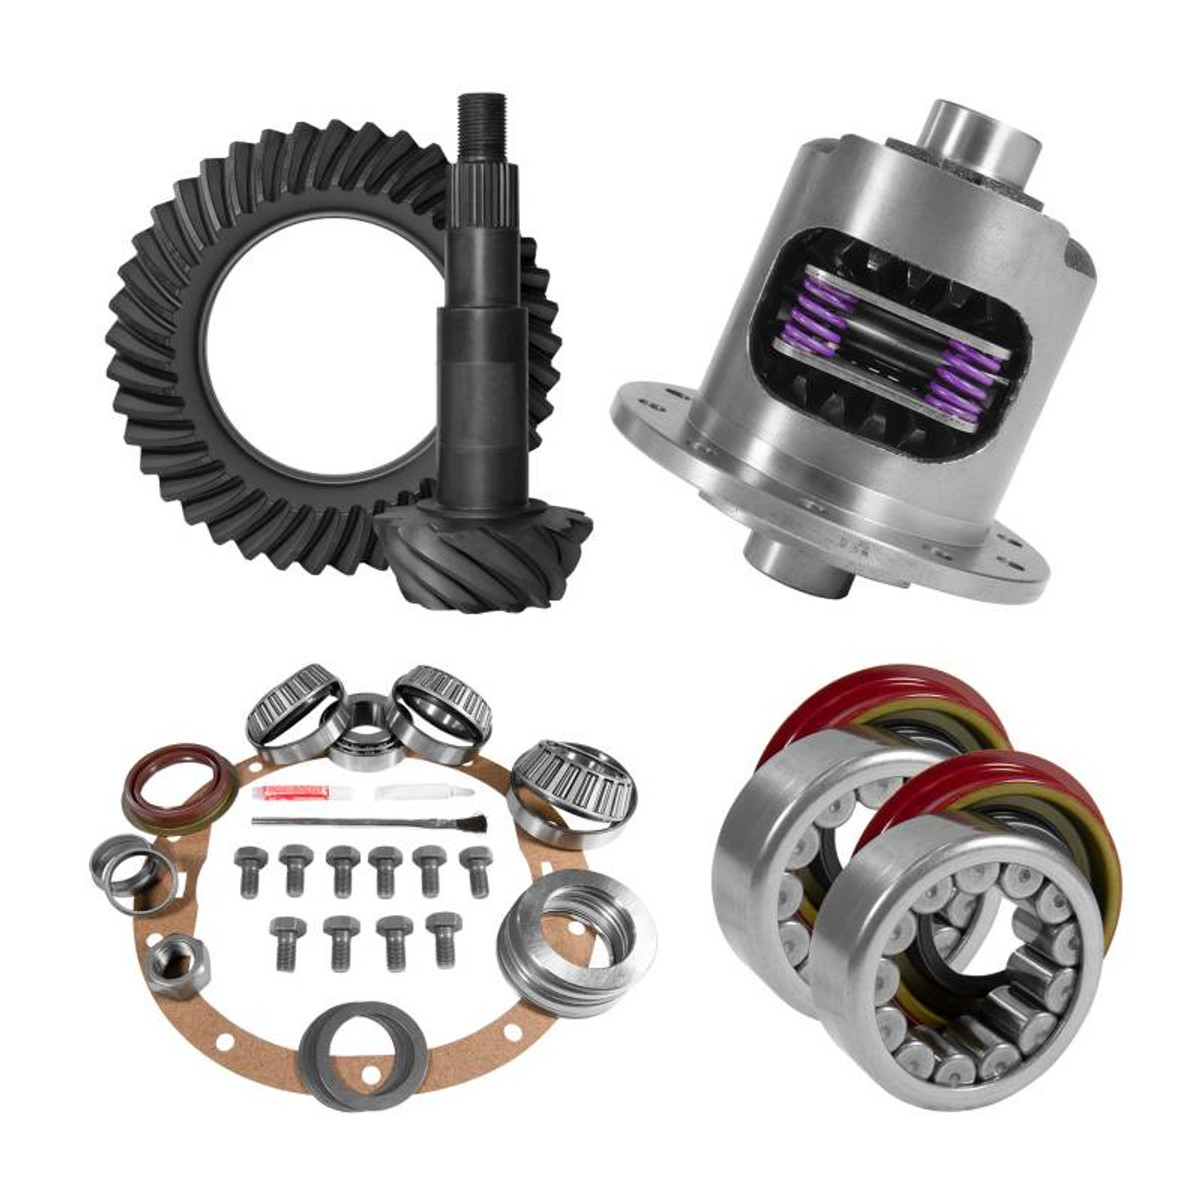 8.6 inch GM 4.11 Rear Ring and Pinion Install Kit 30 Spline Positraction Axle Bearings and Seals YGK2018